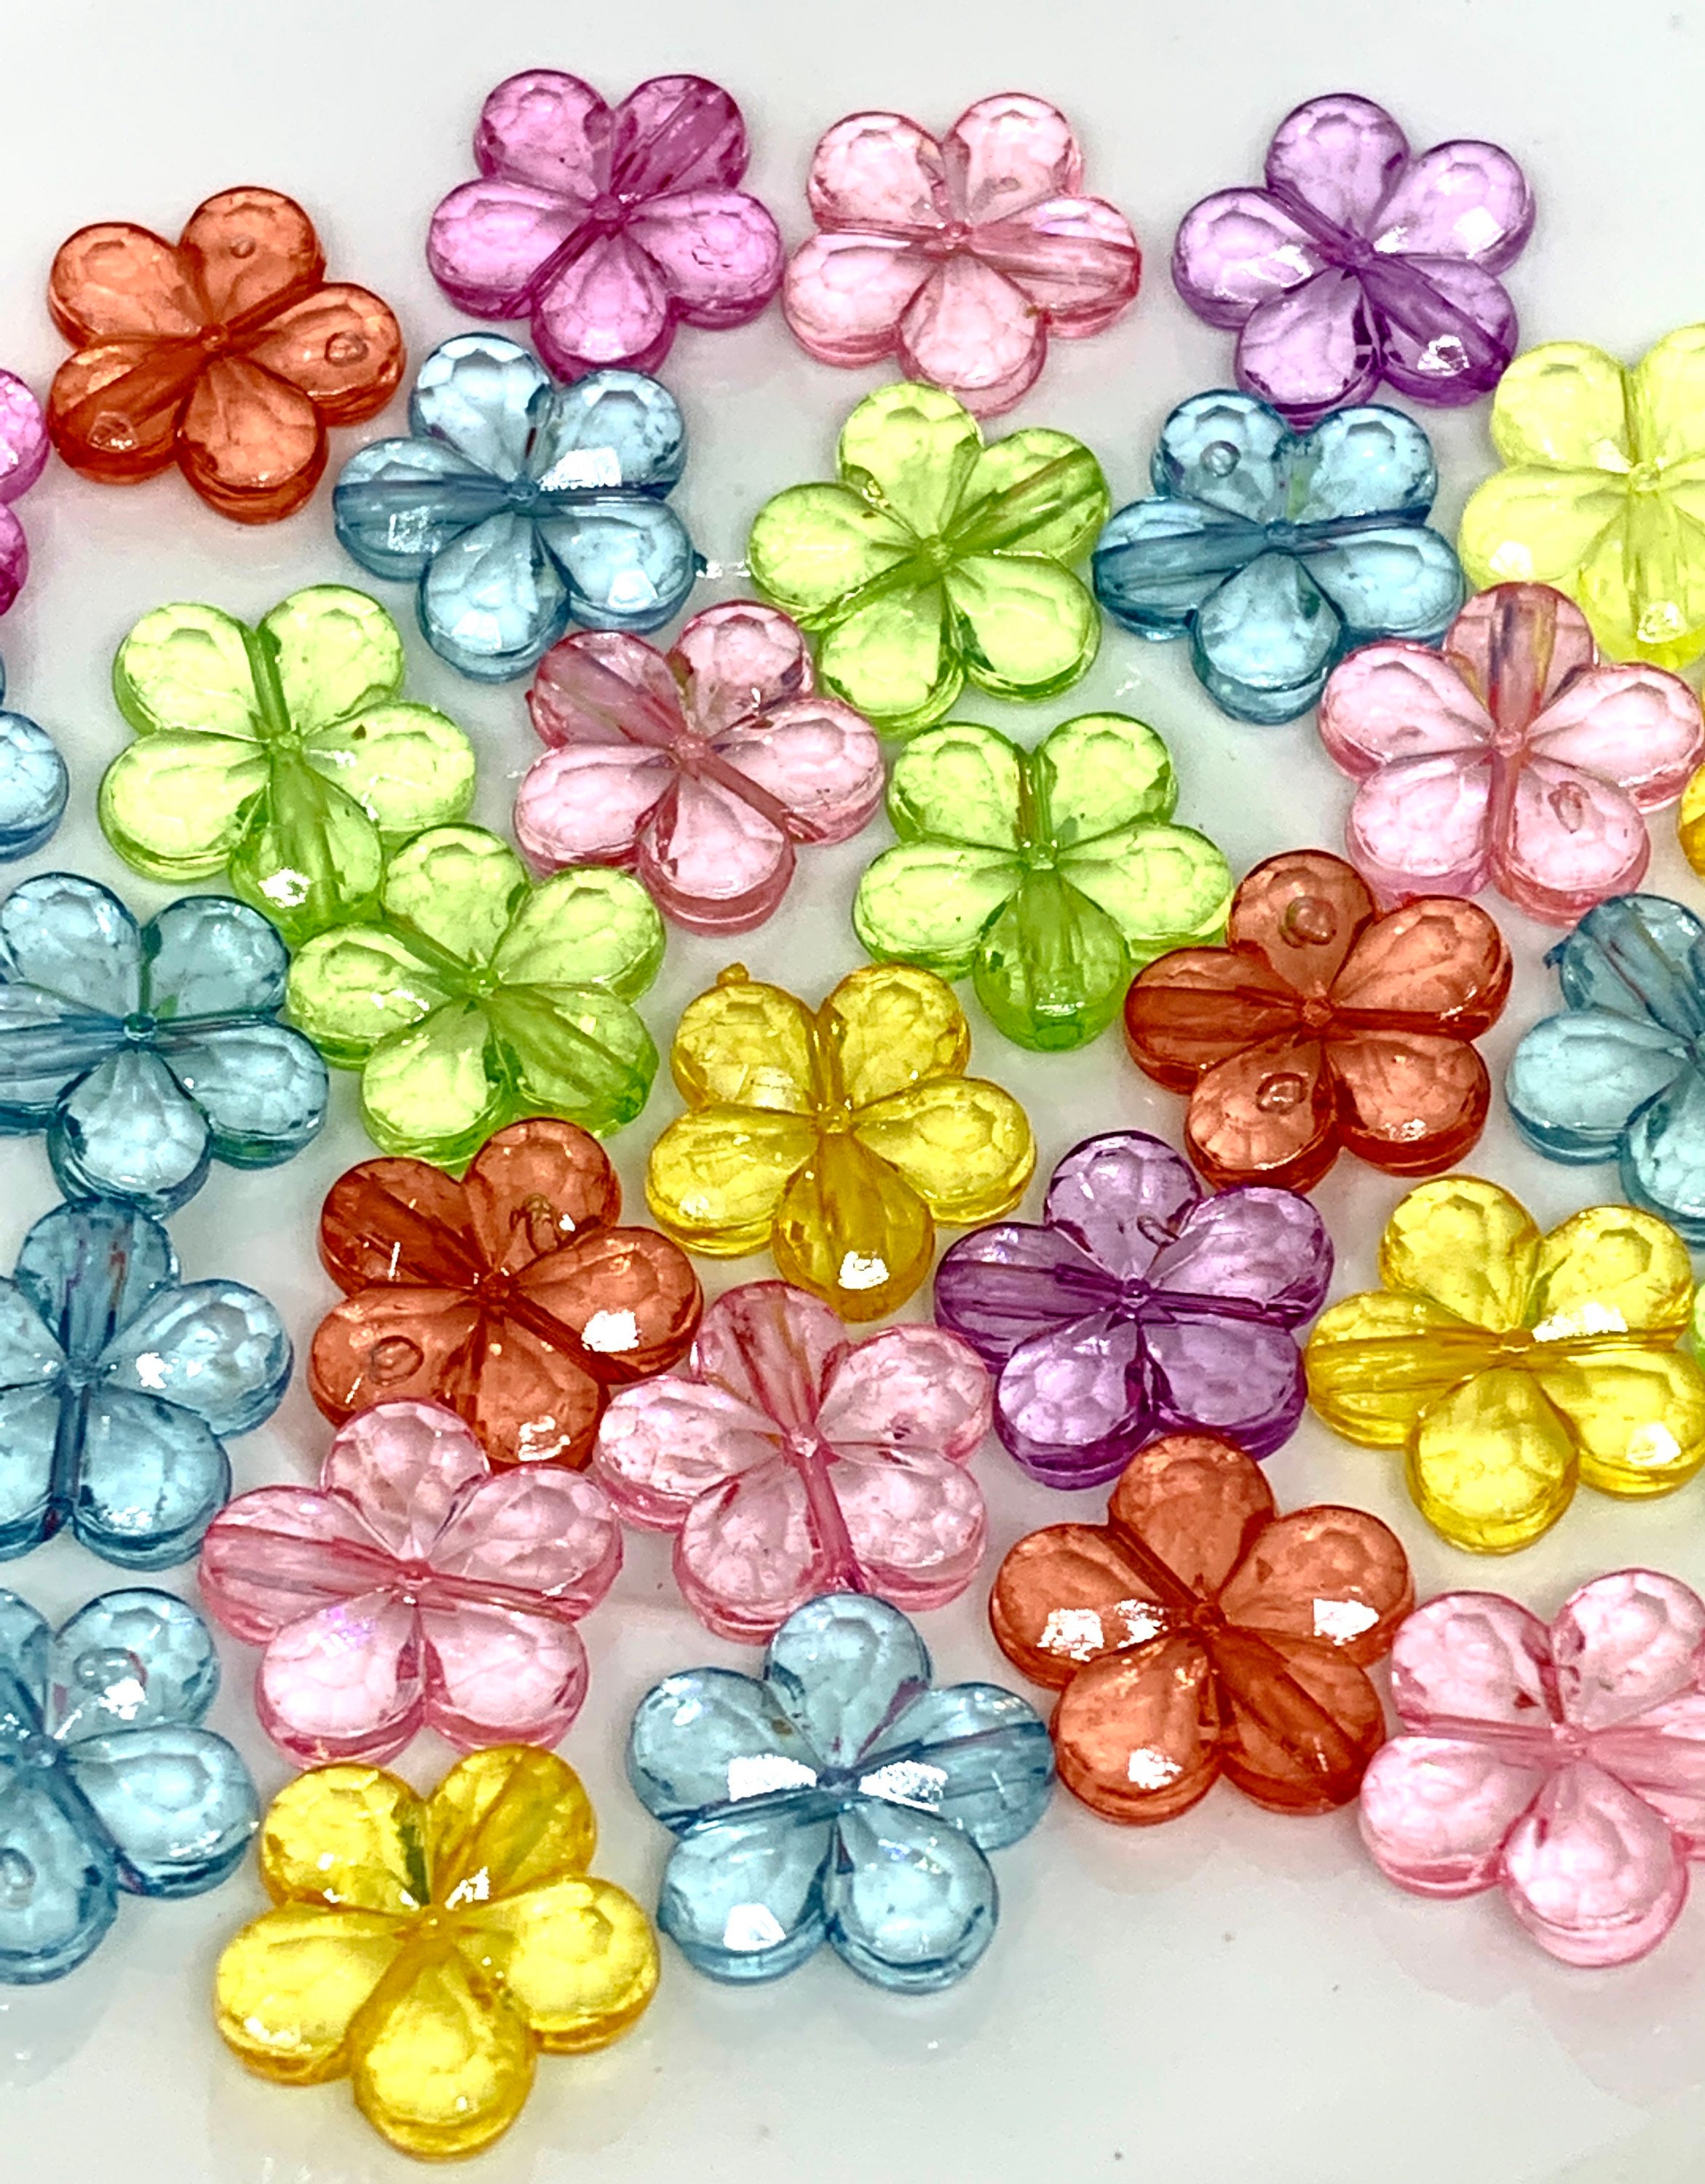 PAGOW 182pcs Transparent Flower Beads, Mix Candy Colors Flower Bead used for DIY Jewelry Findings Making Bracelet Wedding Dec